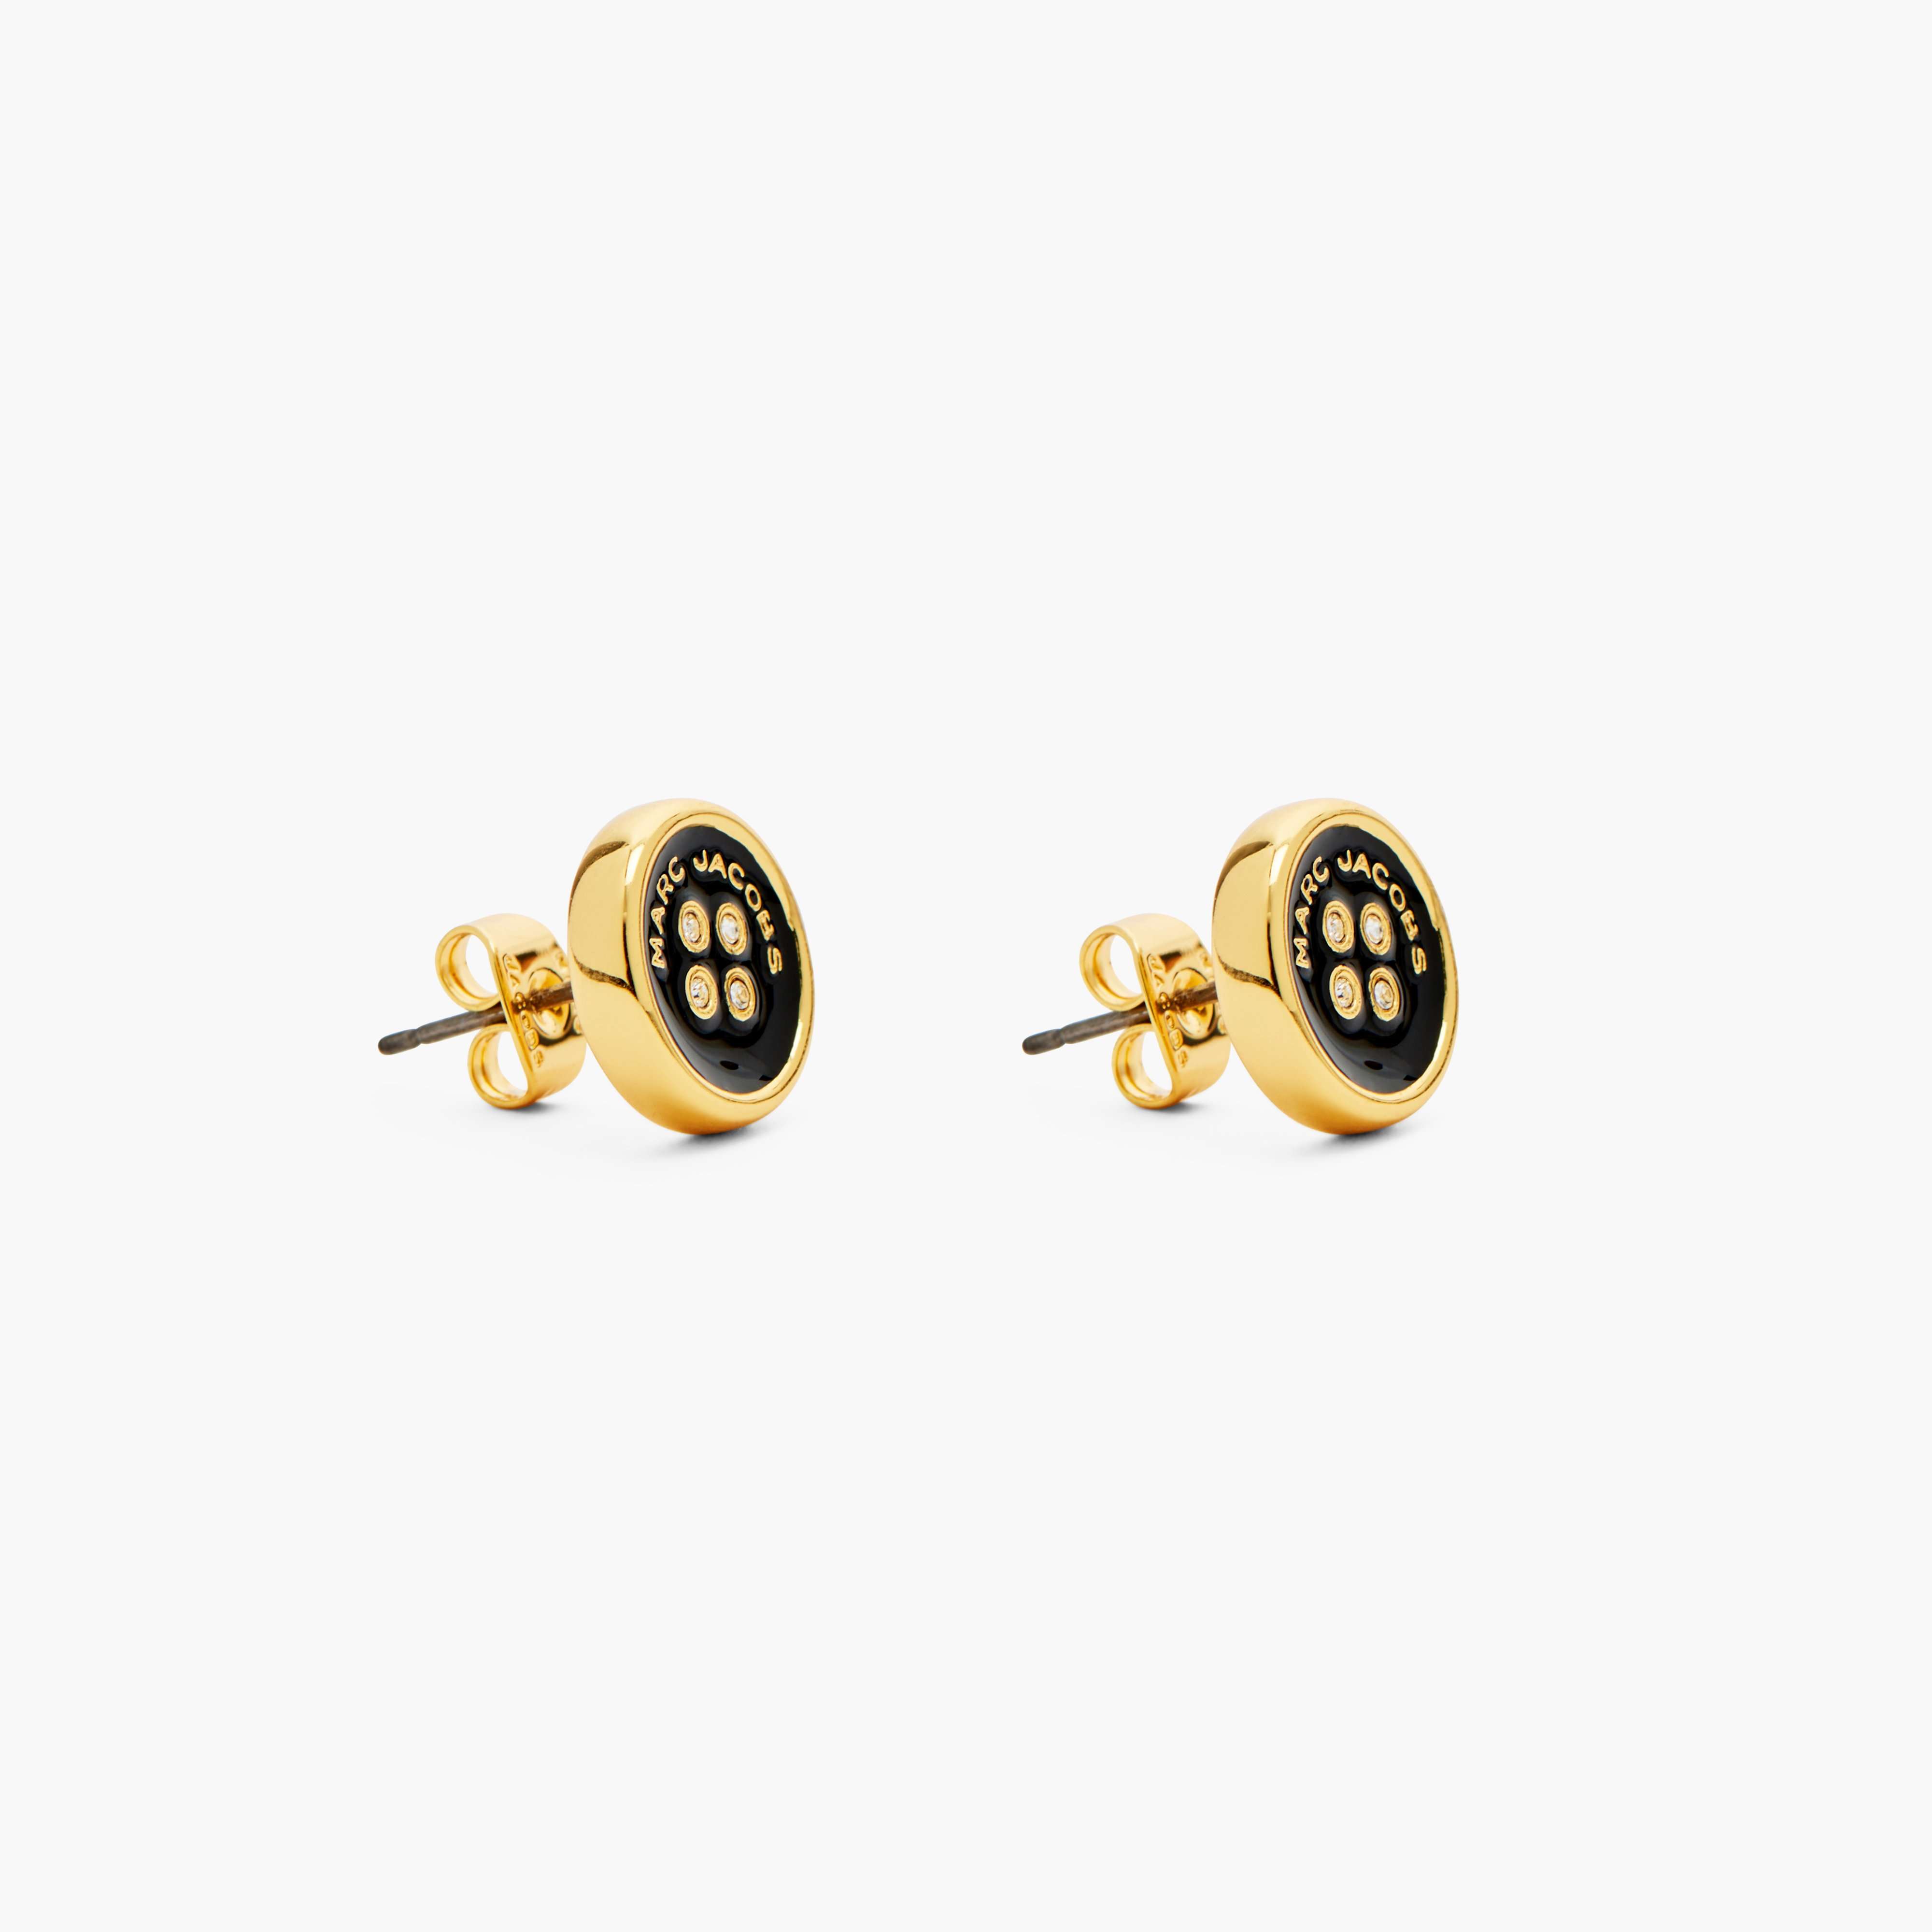 The Button Stud Earrings in Gold/Black